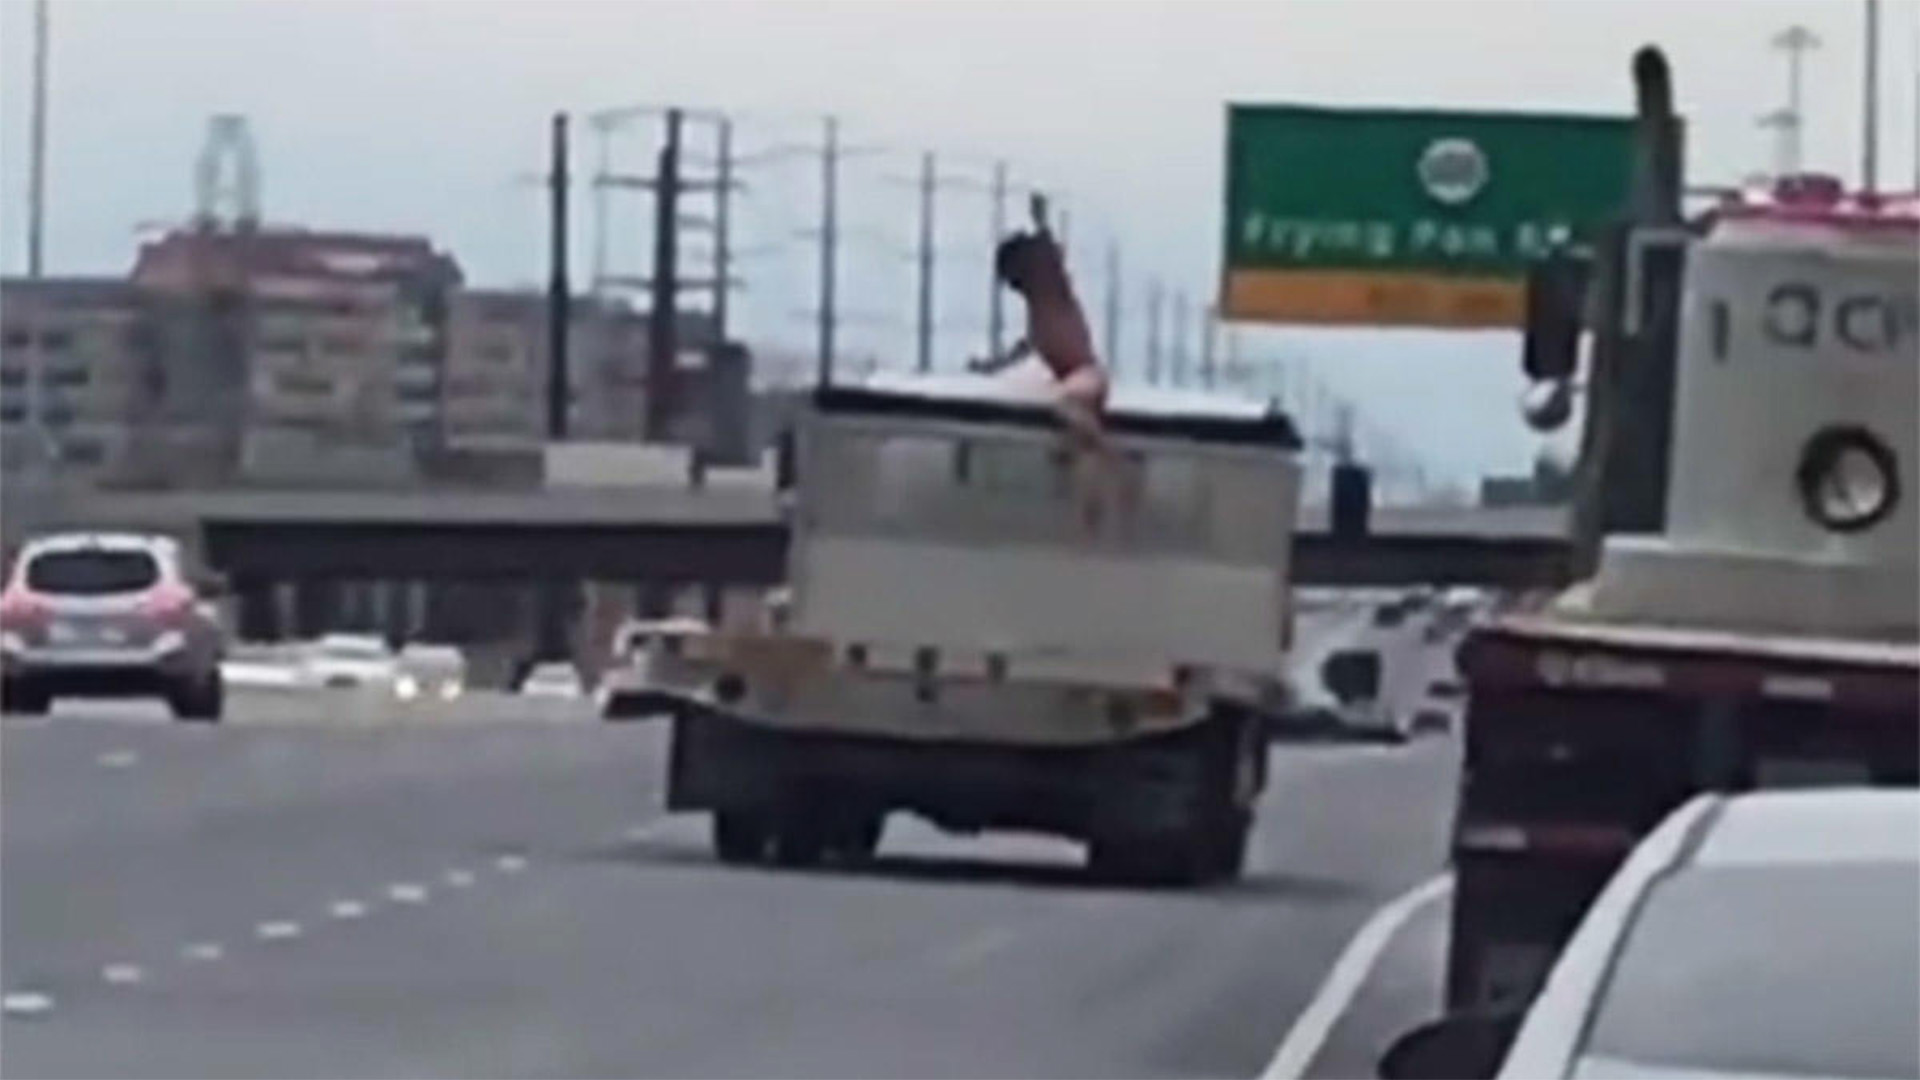 Naked man arrested after running amok in highway traffic 